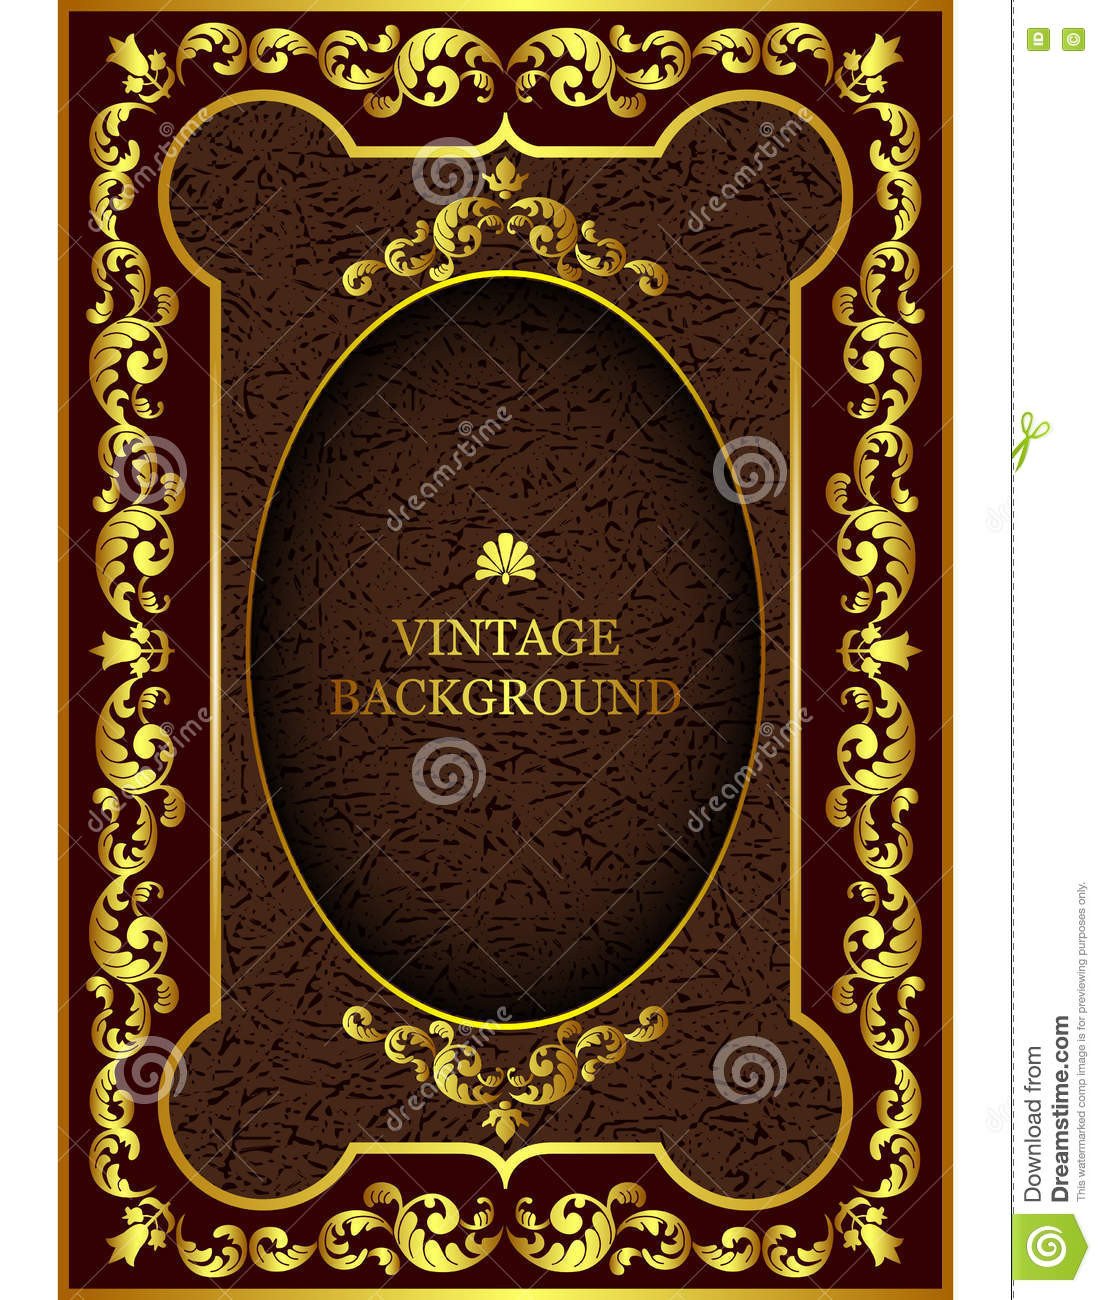 Old Book Cover Template Vector Luxury Vintage Border In the Baroque Style with